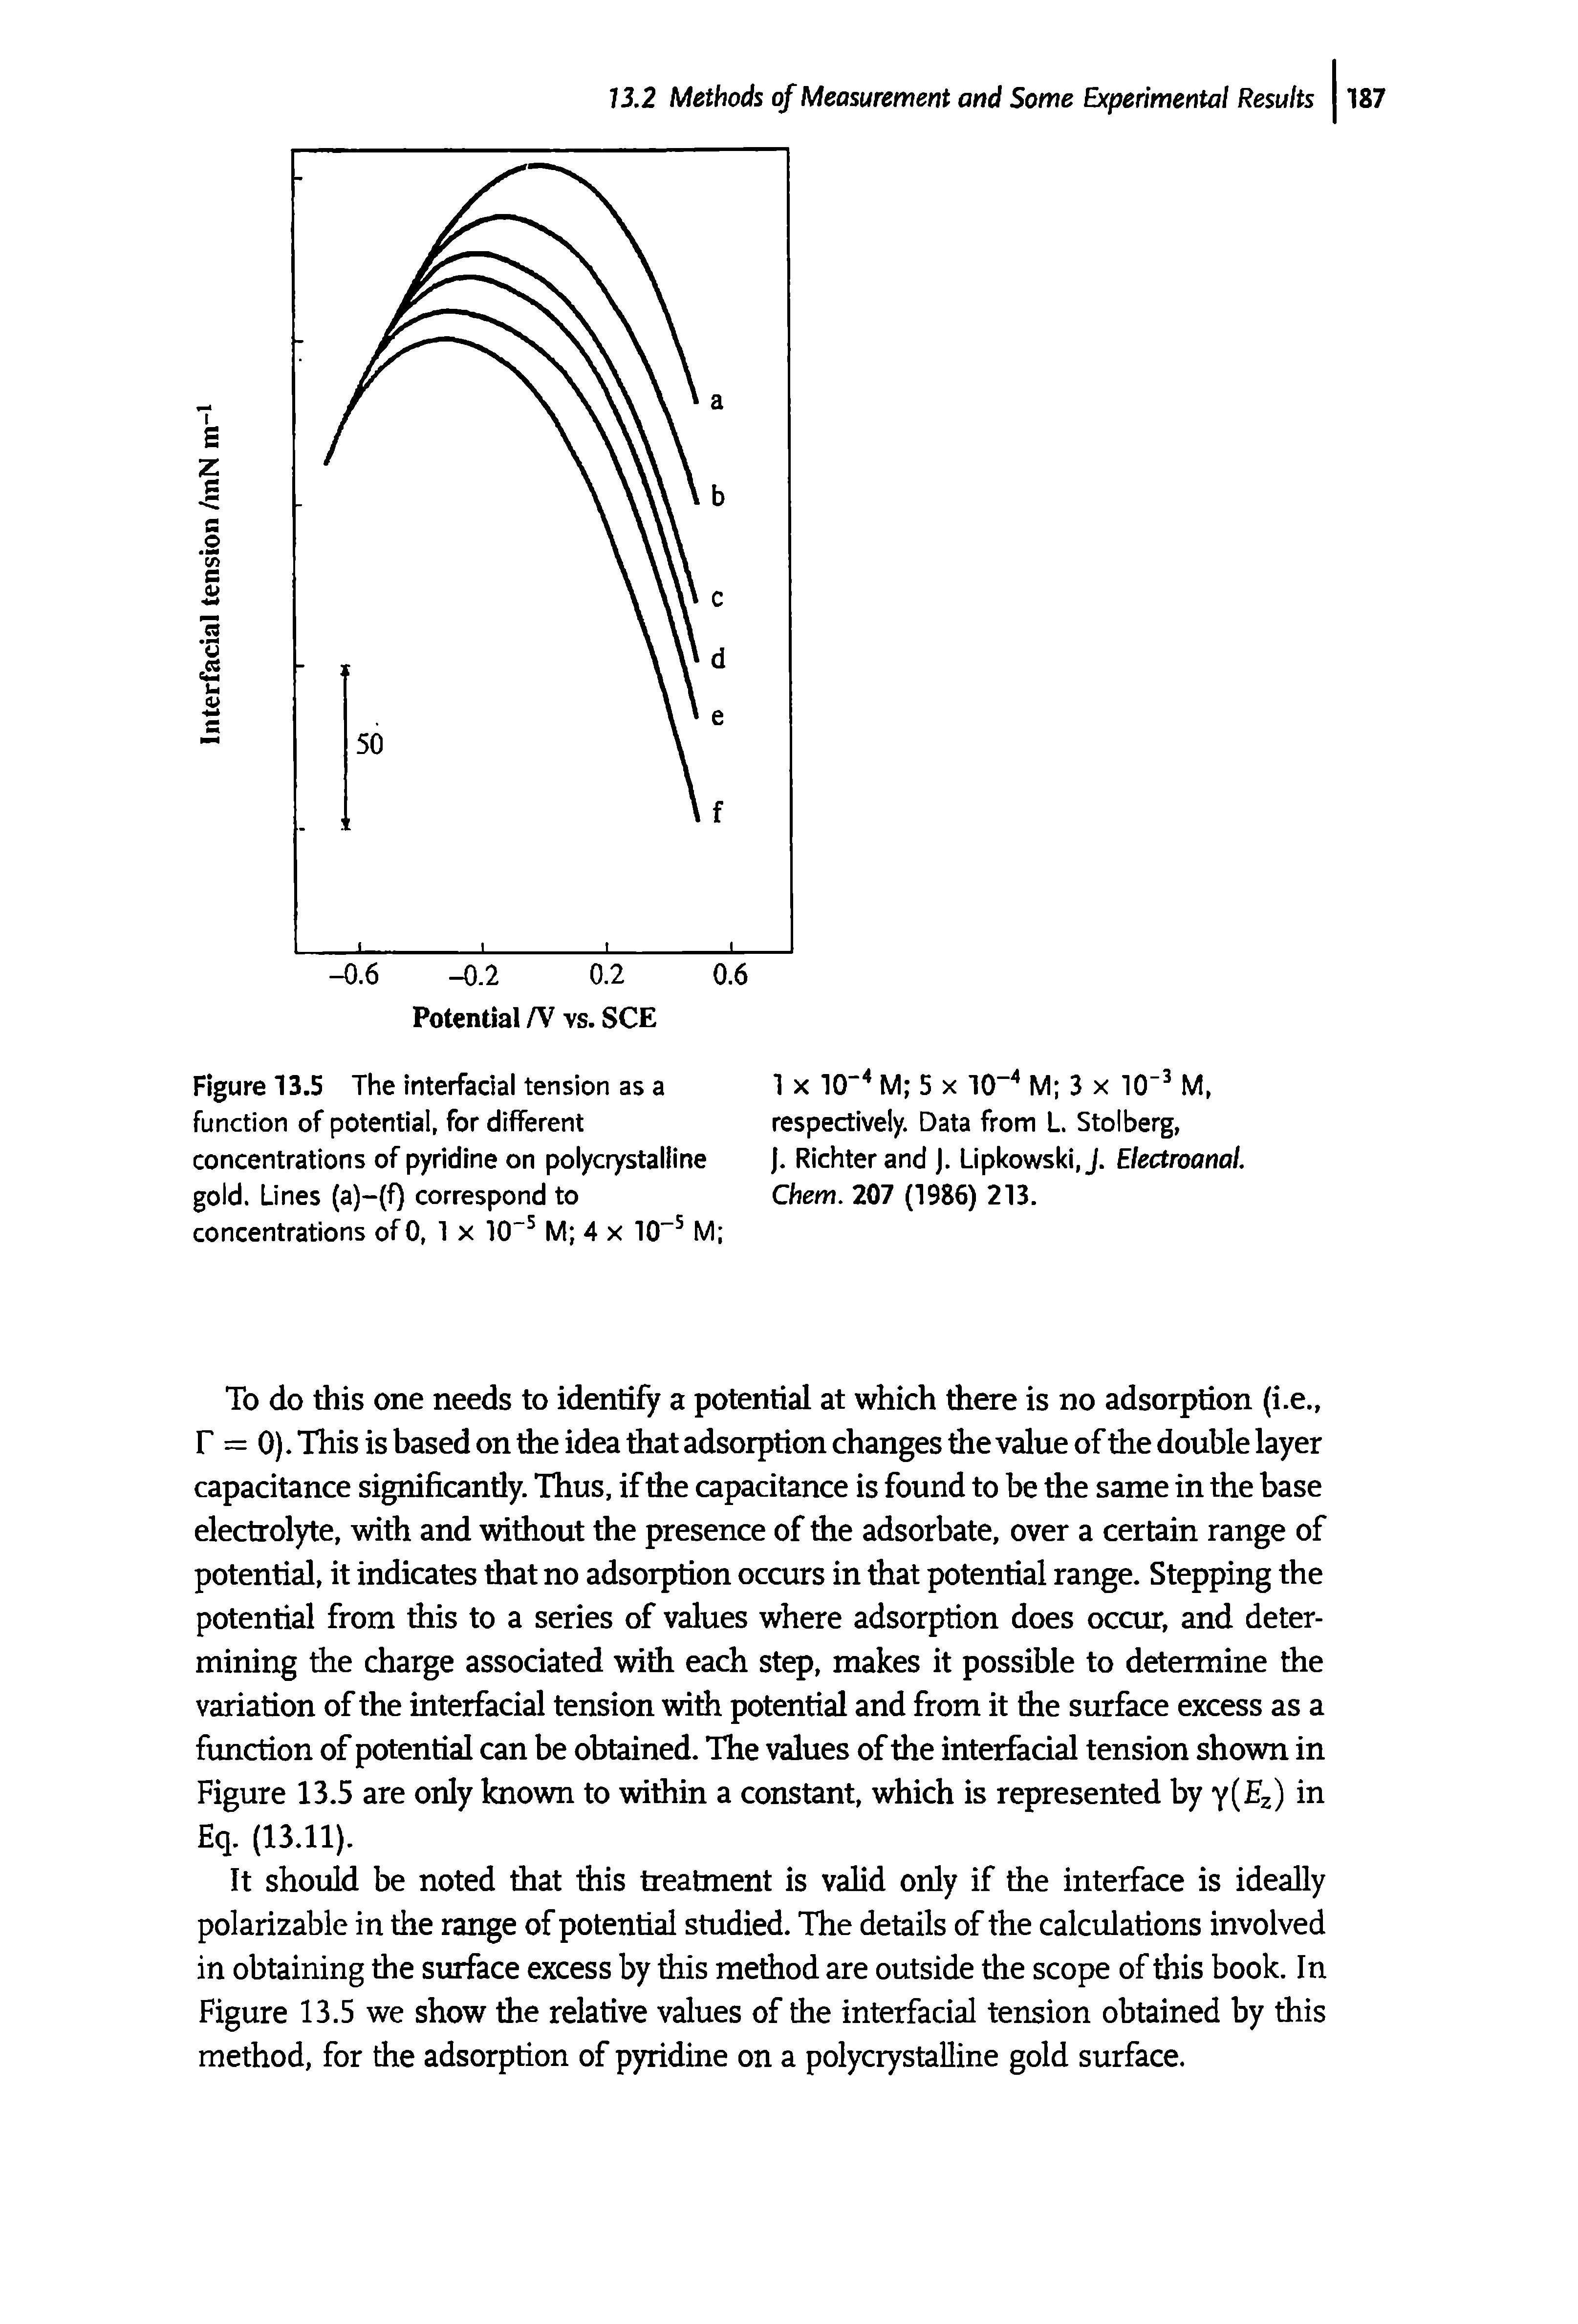 Figure 13.5 The Interfadal tension as a function of potential, for different concentrations of pyridine on polycrystalline gold. Lines (a)-(f) correspond to concentrations of 0, 1 x 10" M 4 x 10 M ...